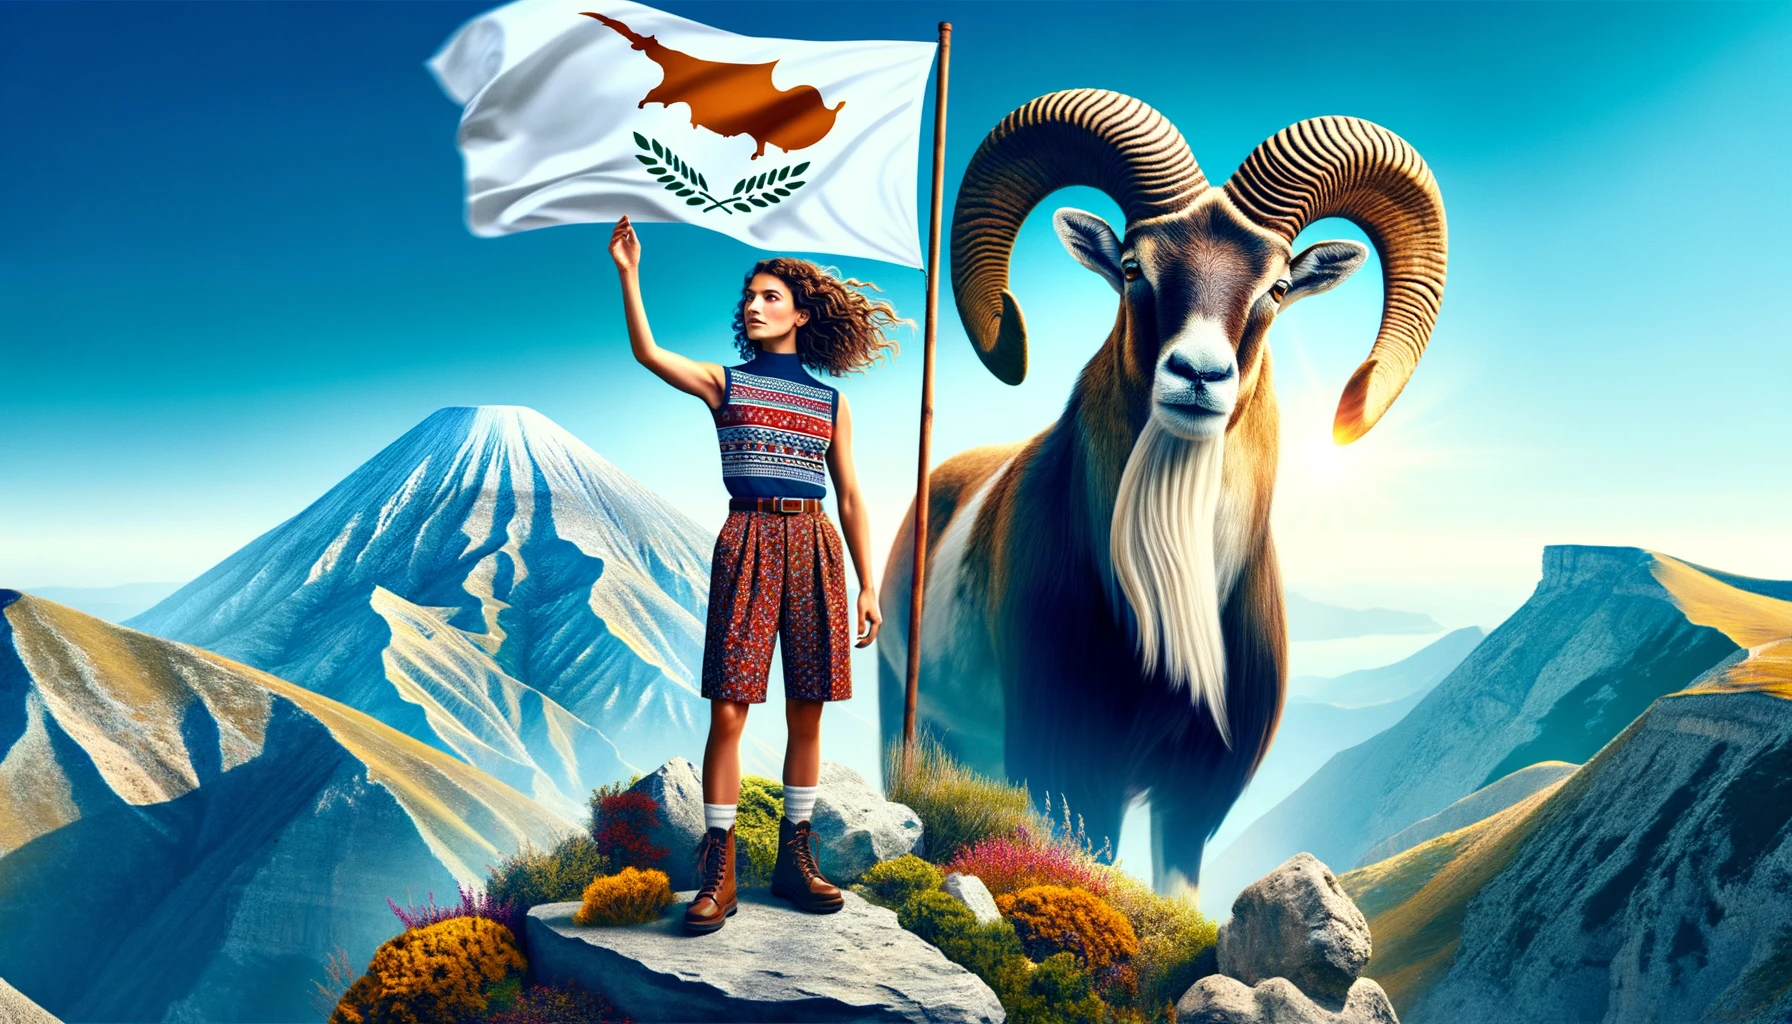 A photo-realistic image of a girl with medium-length wavy hair, wearing a sleeveless top and shorts patterned with the Cyprus flag. She is standing on a mountain summit with her hand raised, grasping the Cyprus flag that billows in the wind. Next to her, a robust mouflon goat with impressive spiraled horns looks out over the landscape, embodying the wild spirit of the mountainous terrain. The sky is a brilliant azure with the sun shining brightly.